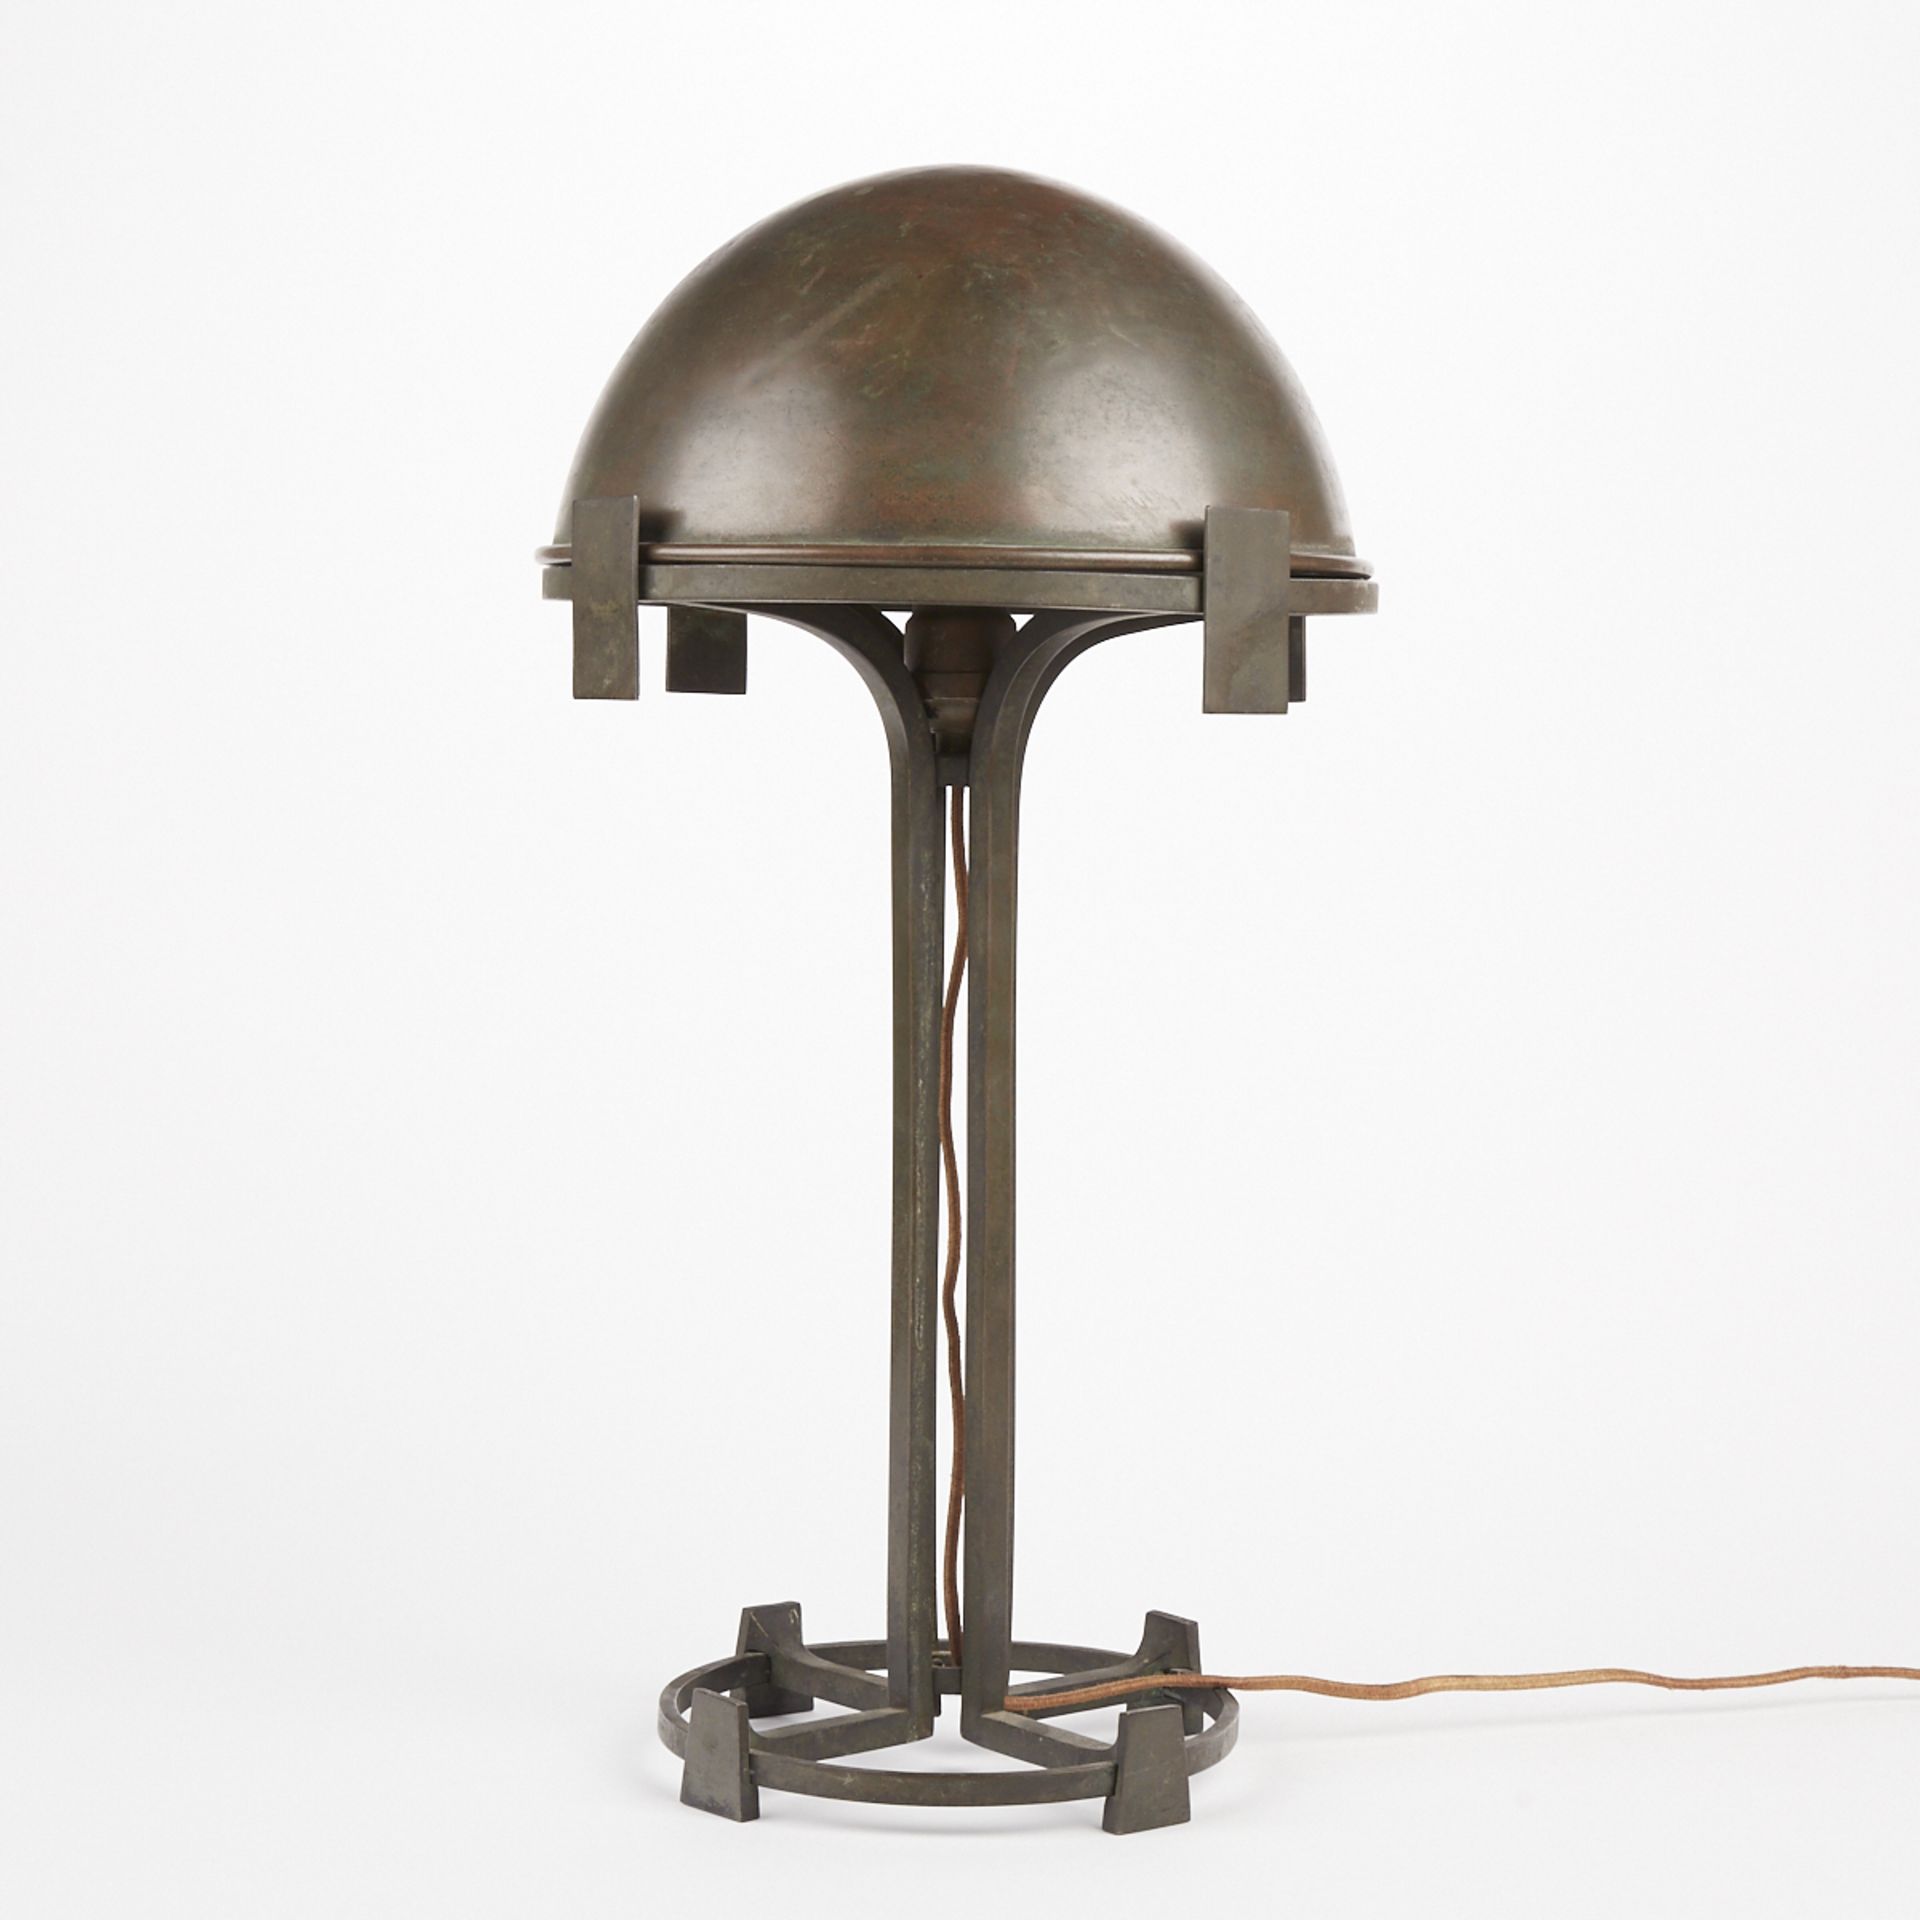 Early 20th c. Secessionist Dome Desk Lamp Mkd Germany - Image 4 of 7